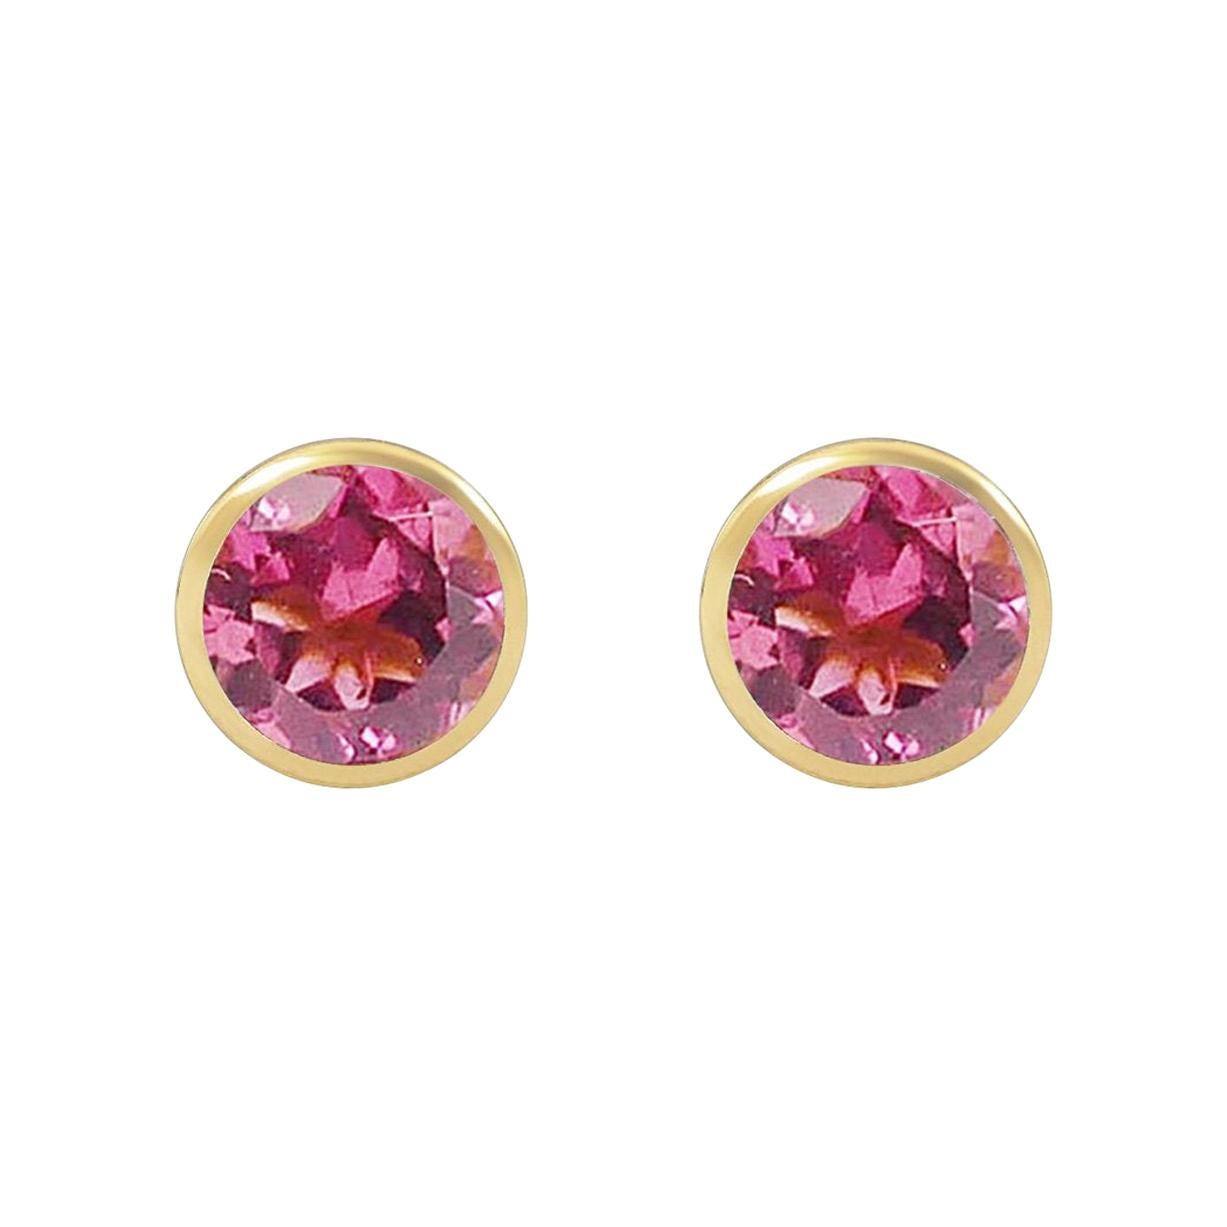 Handcrafted 2.60 Carats Pink Tourmaline 18 Karat Yellow Gold Stud Earrings For Sale